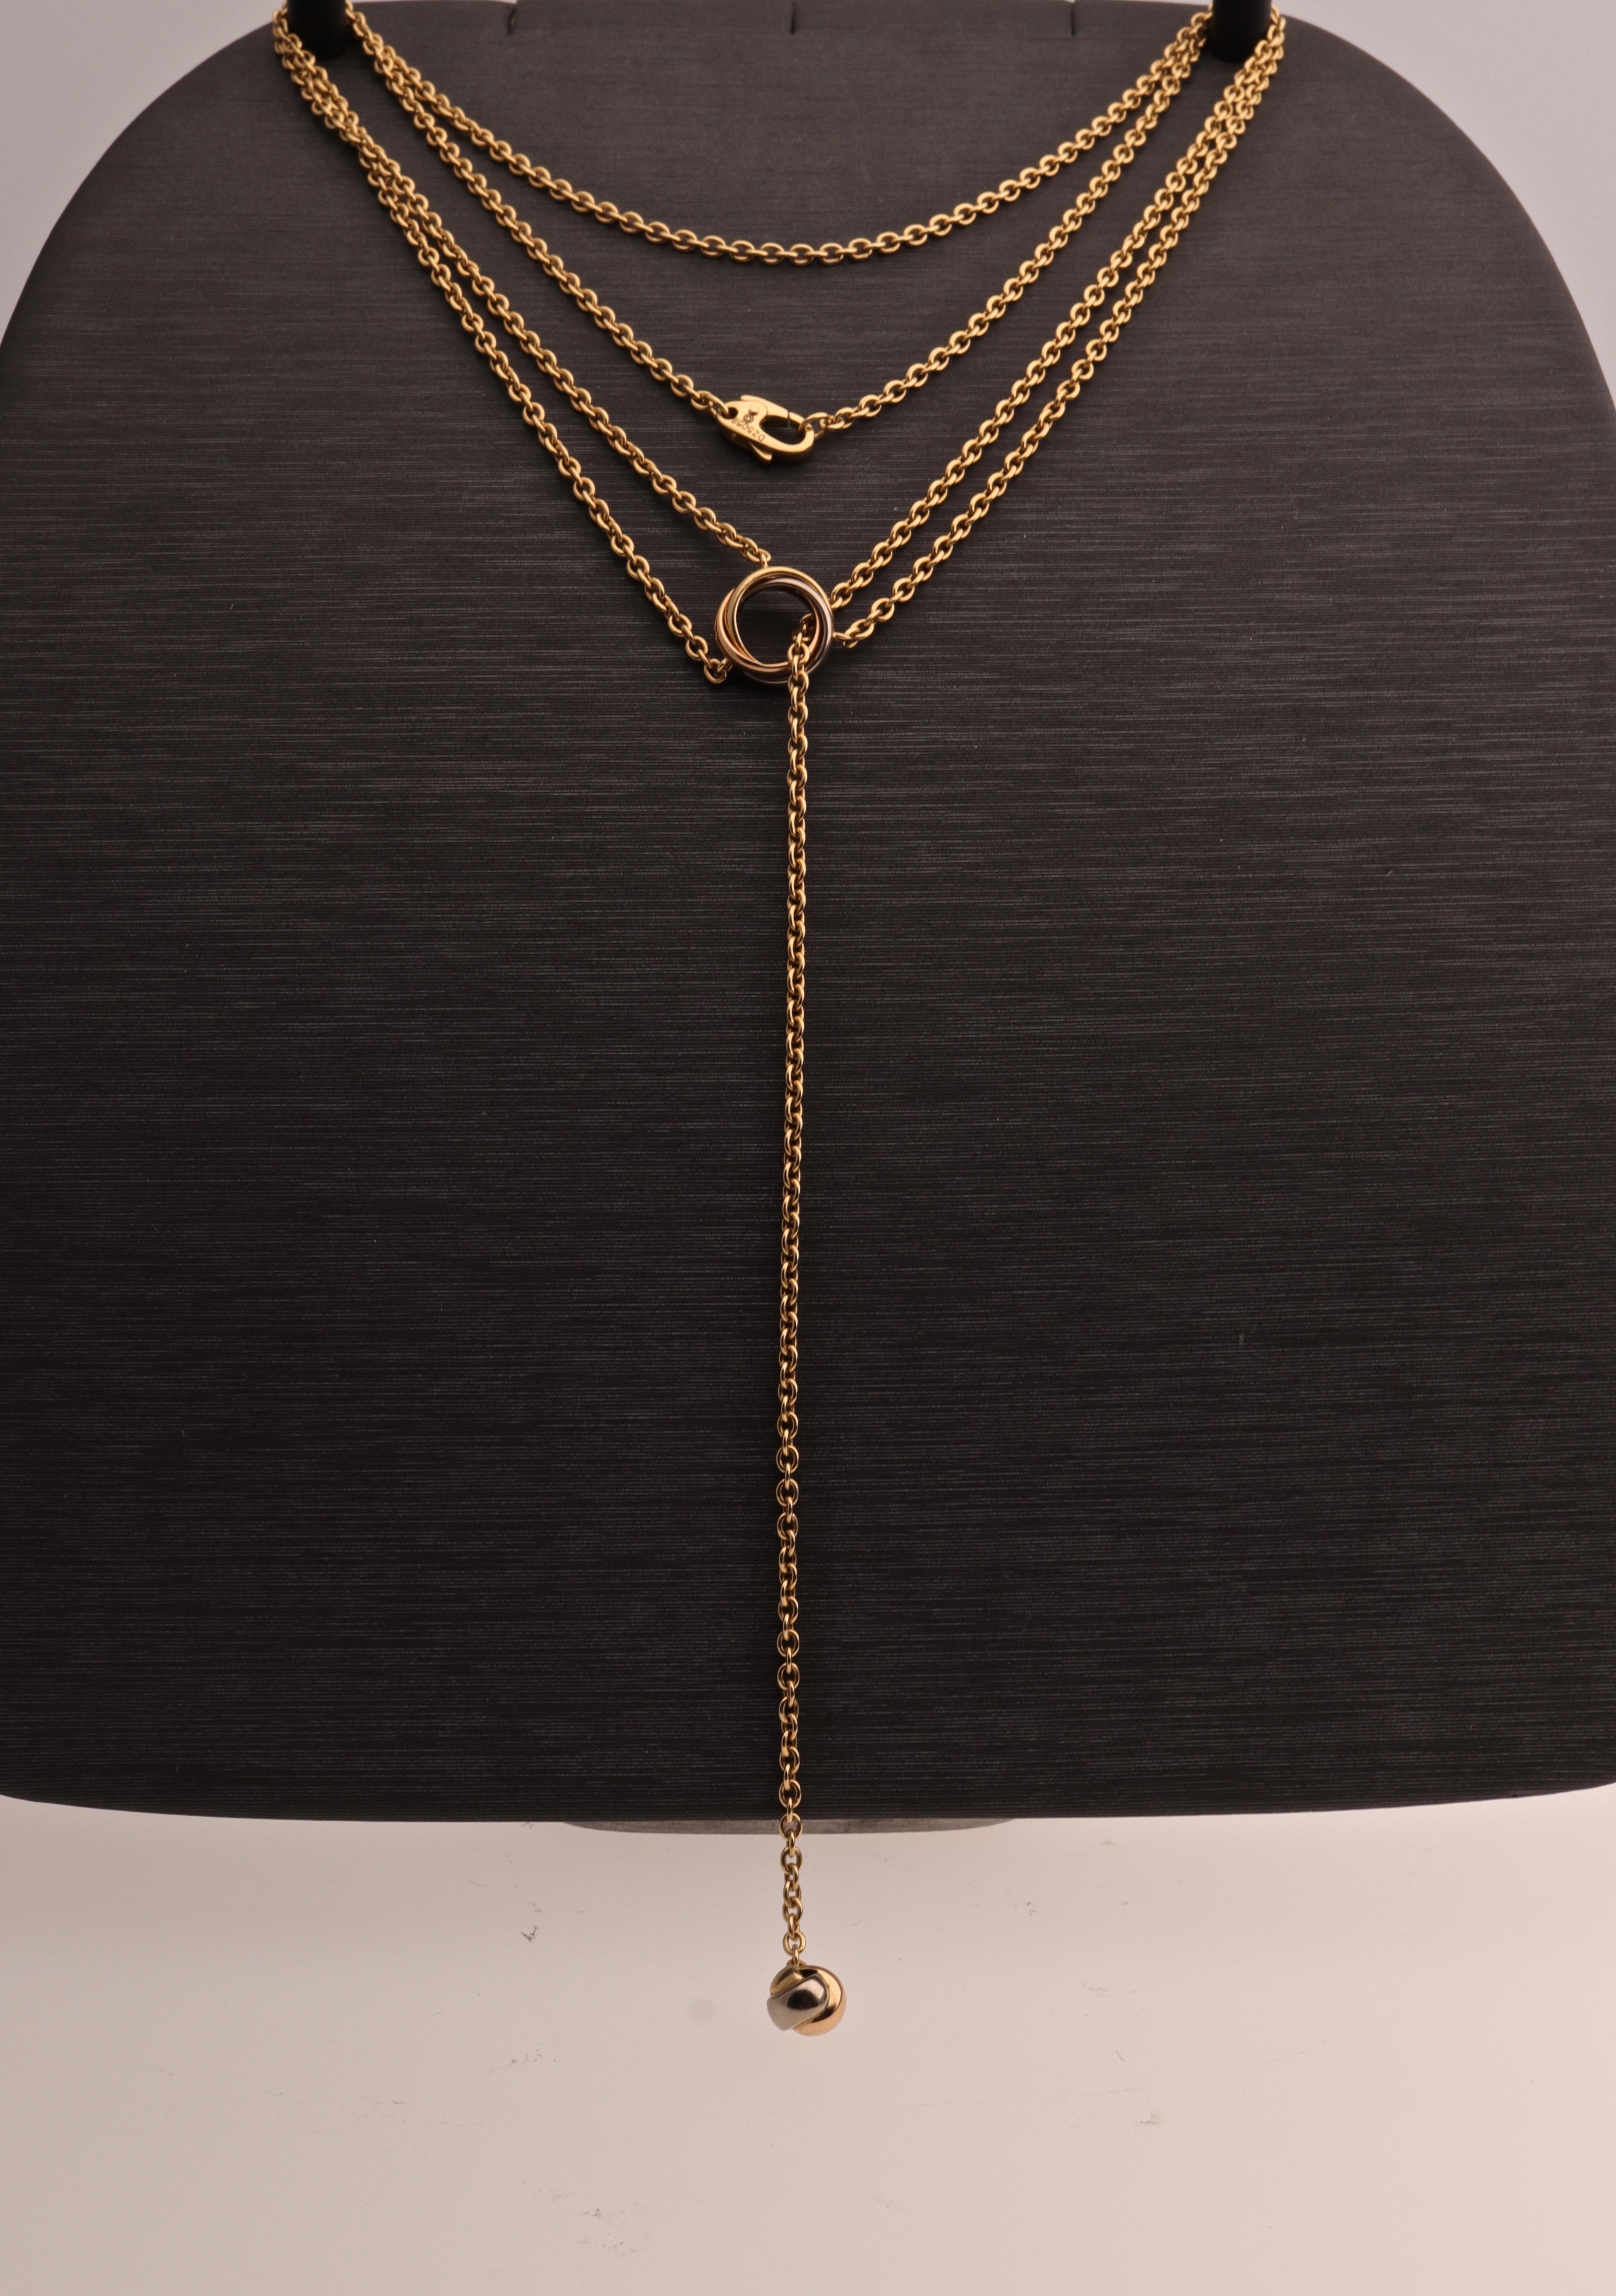 18 kt. yellow, rose, white gold necklace signed by Cartier.
This necklace has an interlocking gold ring where the chain goes through.
Is from the Trinity Collection,  contemporary and stylish.